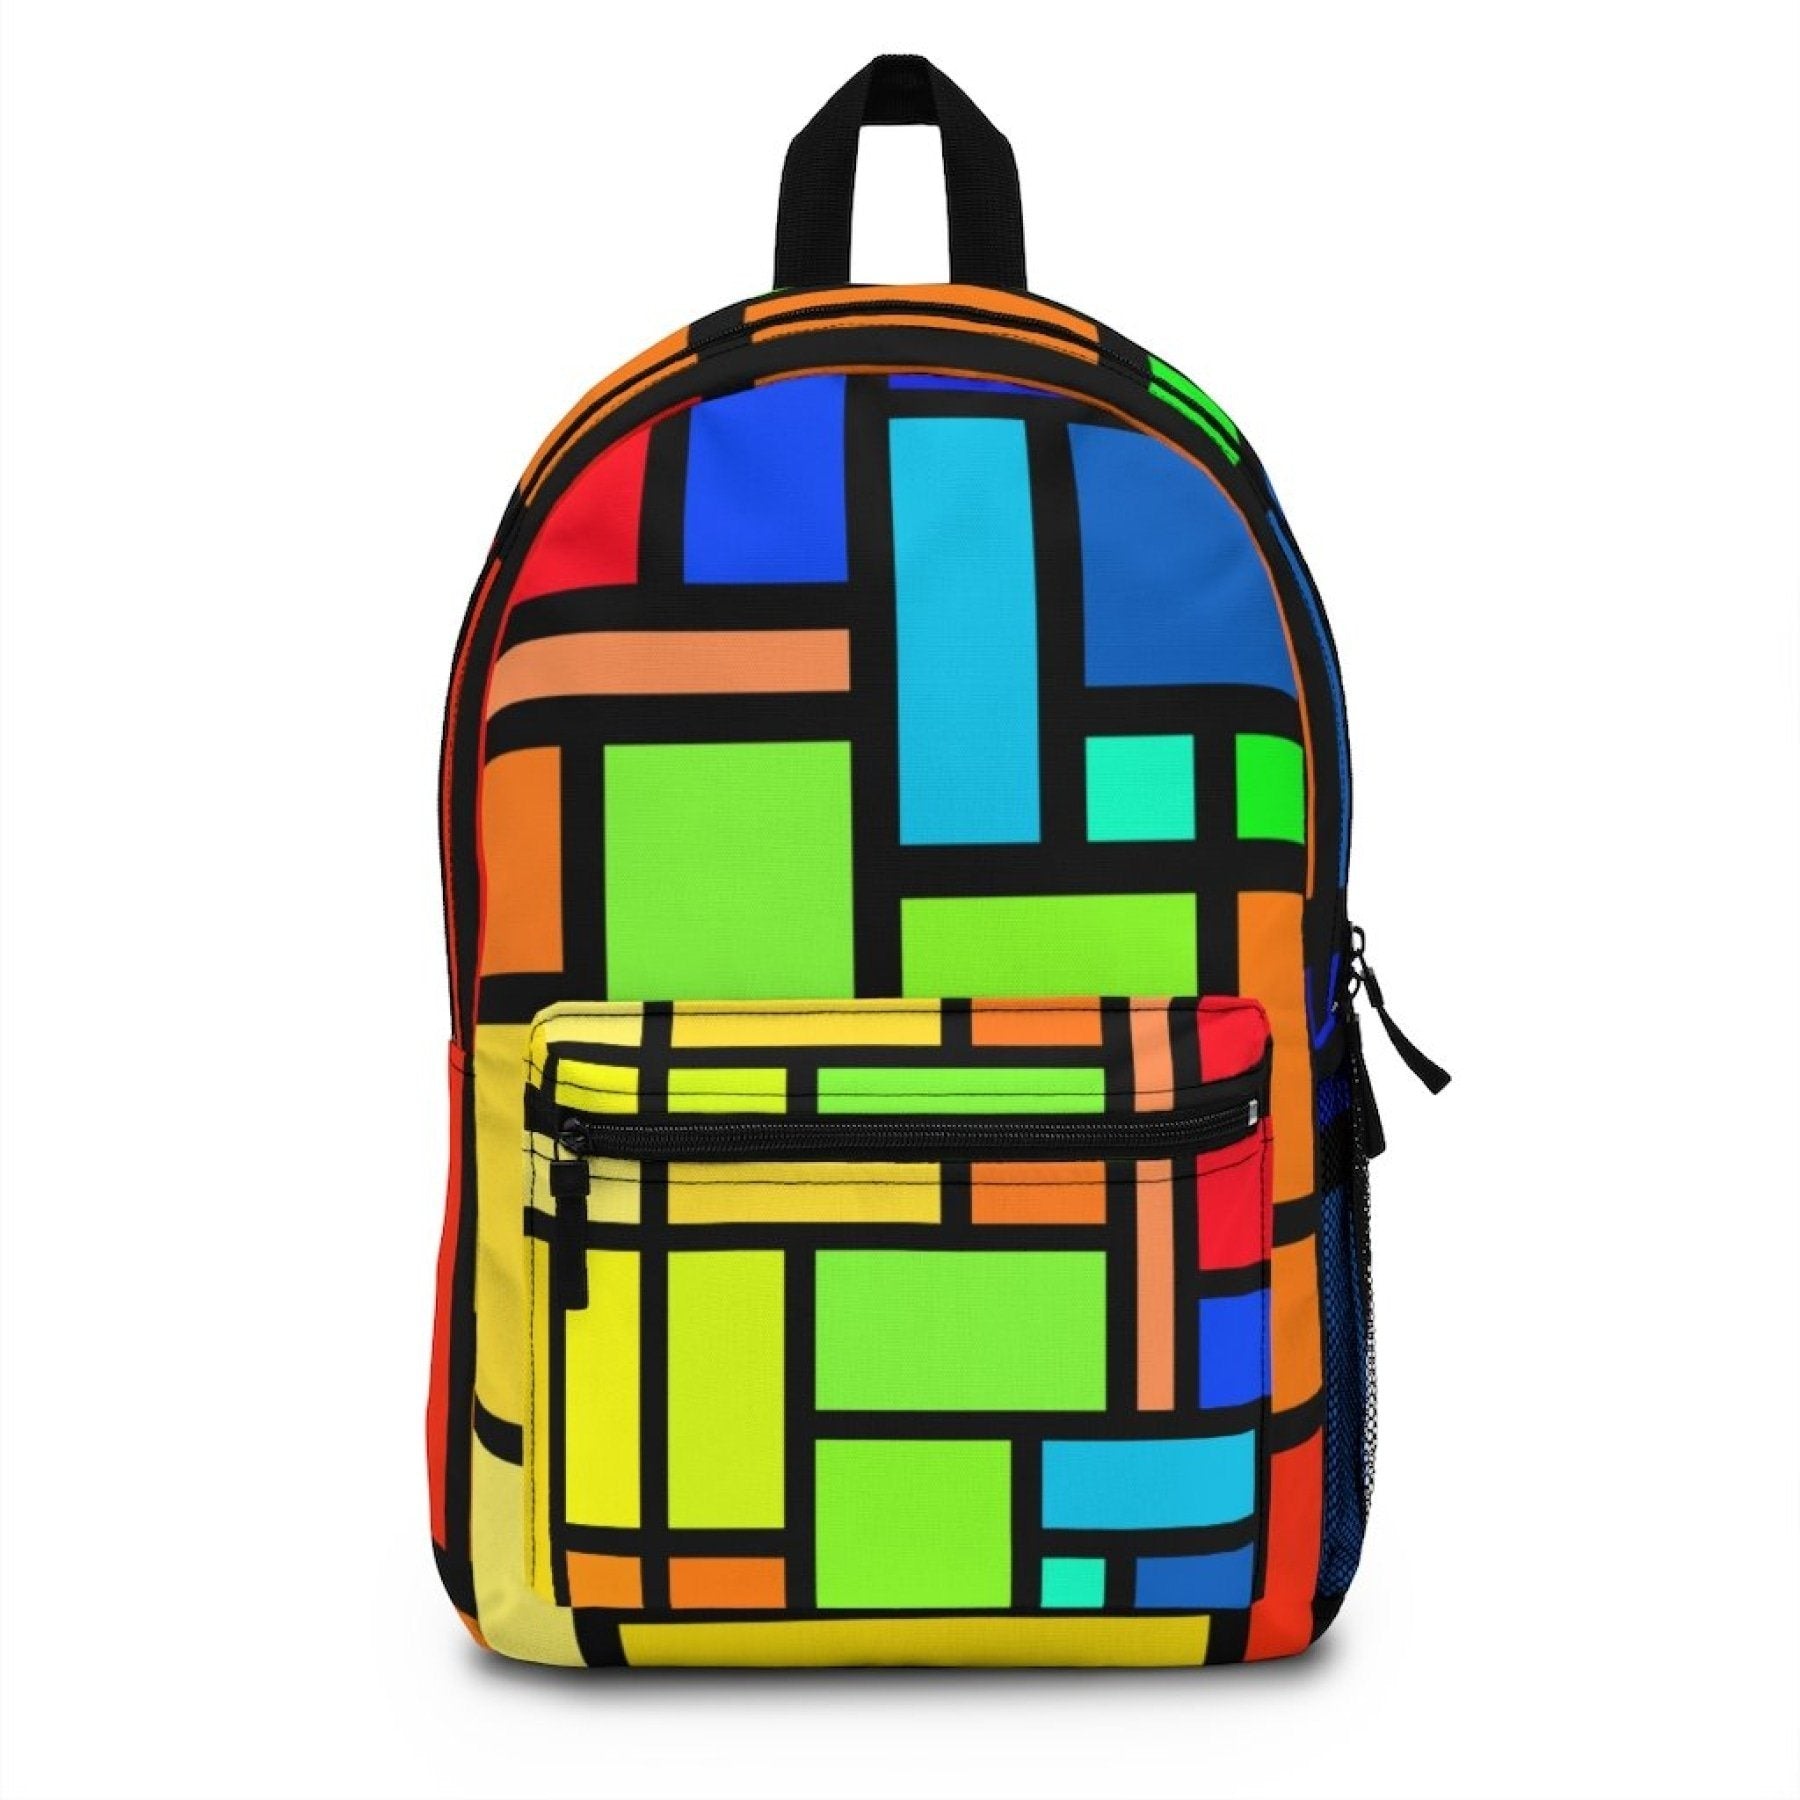 A Doba Backpack Bag, Canvas Double Shoulder Strap Geometric Stripe Design - Multicolor with squares on it.